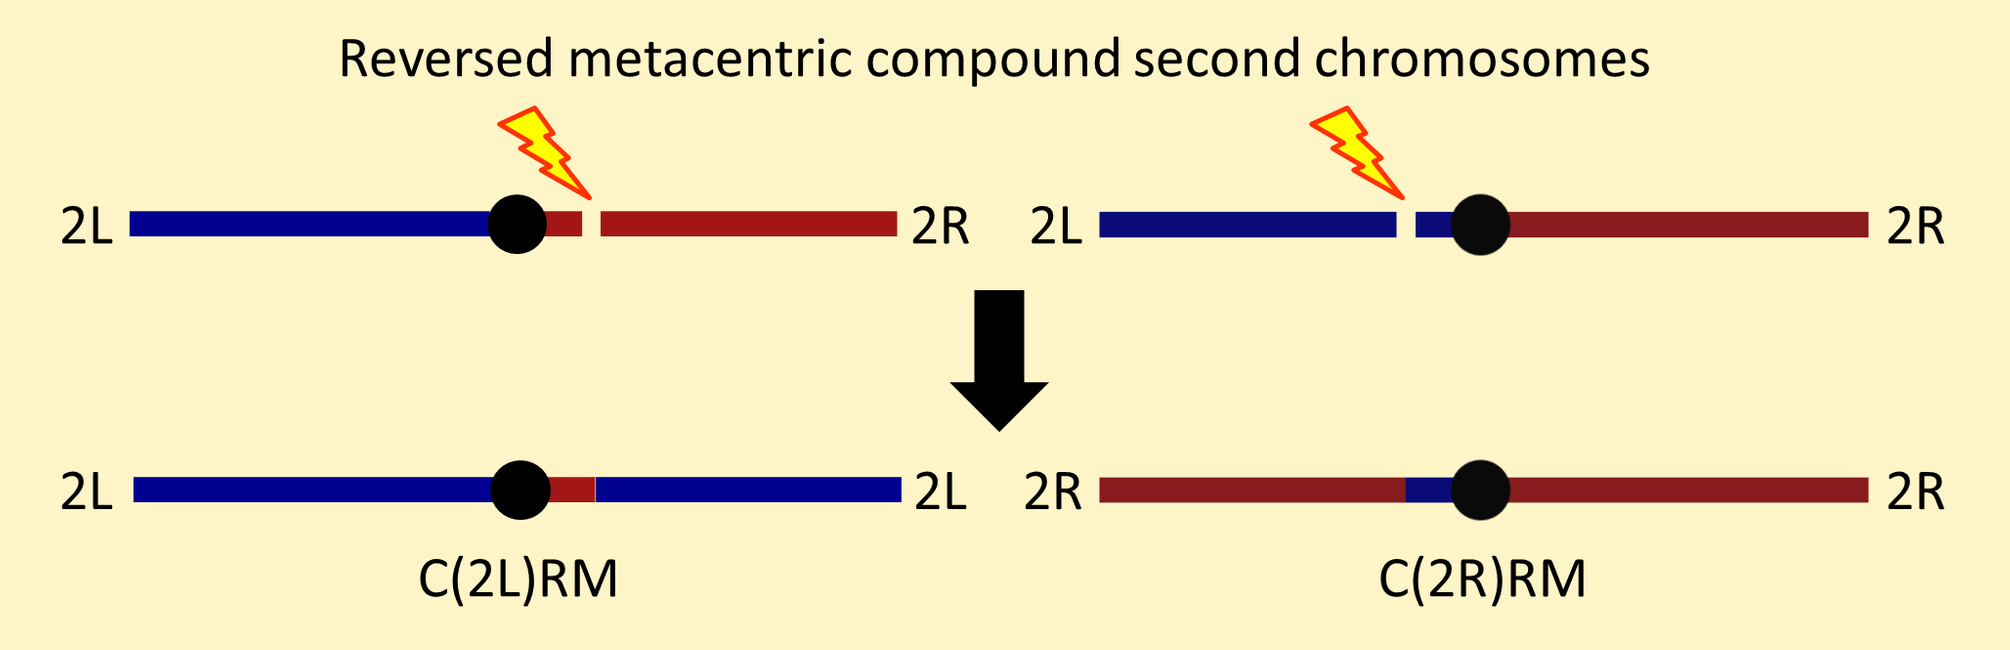 Reversed metacentric compound second chromosomes